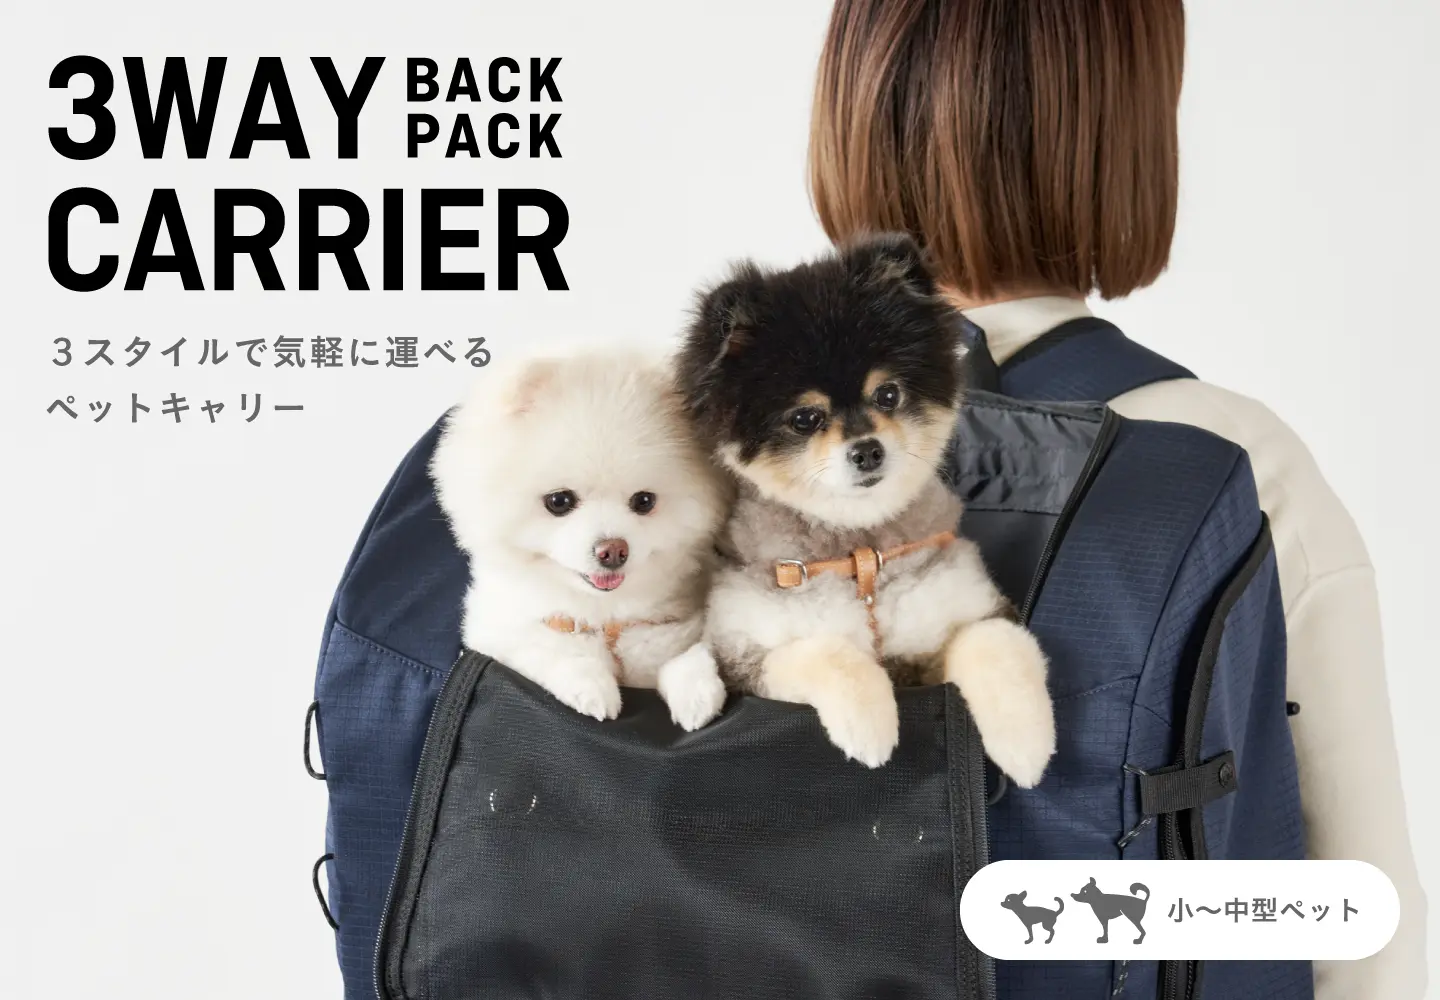 3WAY BACKPACK CARRIER